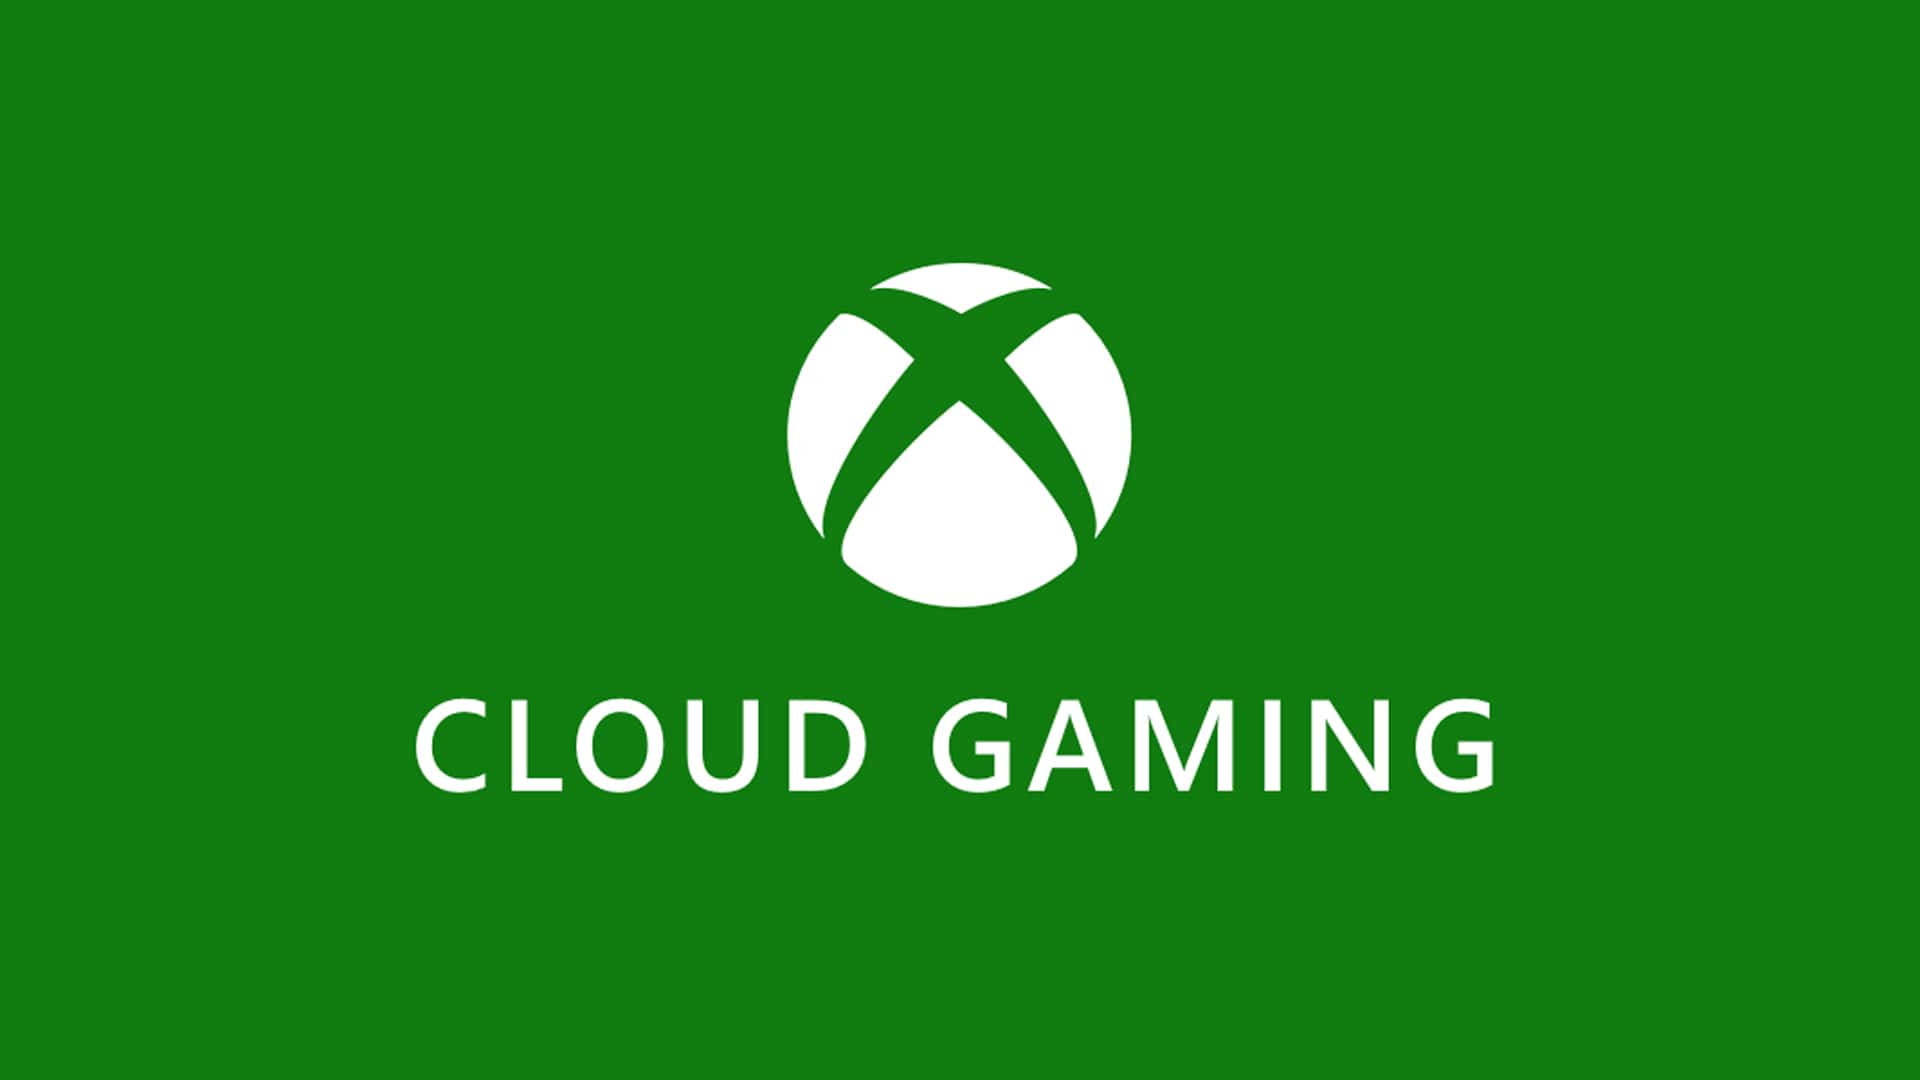 Xbox Cloud Gaming interface showcasing game library and features